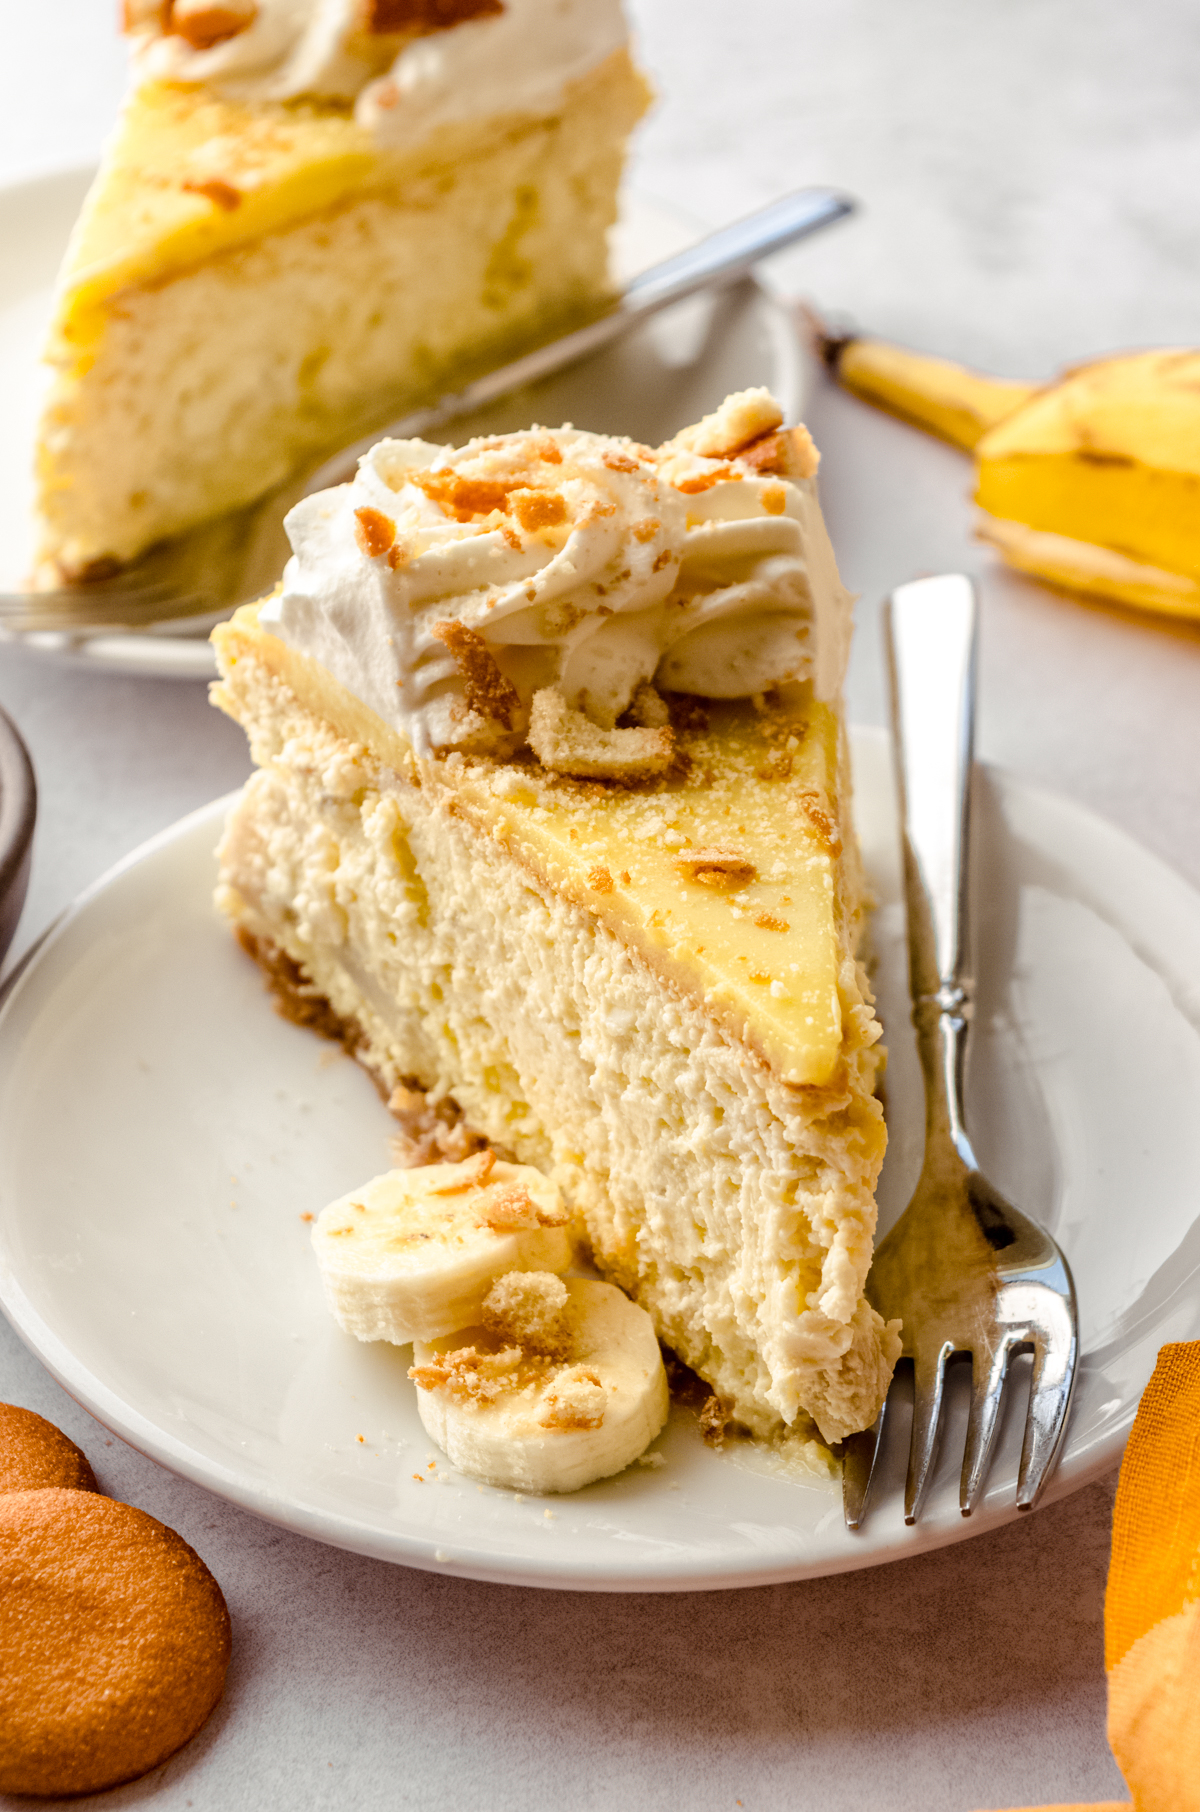 A slice of banana pudding cheesecake on a plate with a fork and some slices of bananas on the plate.